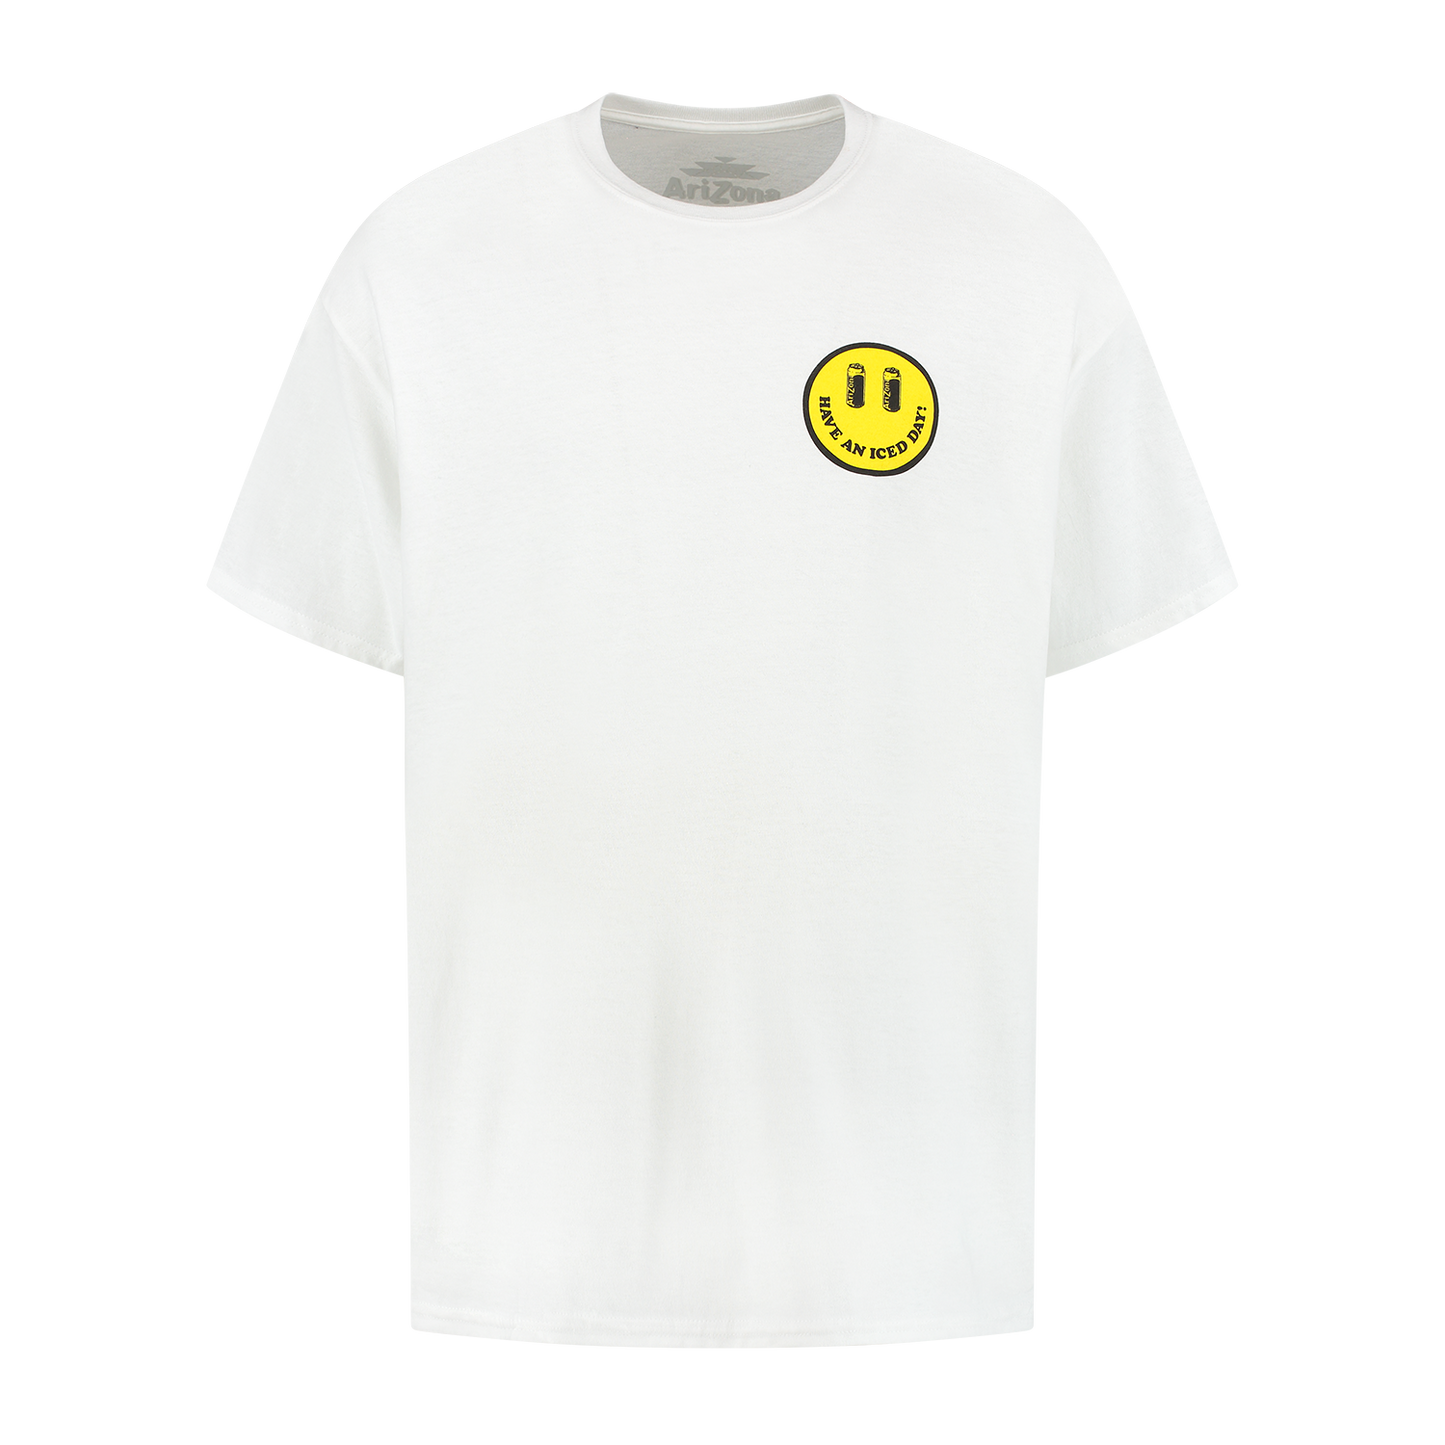 "HAVE AN ICED DAY" T-SHIRT WHITE